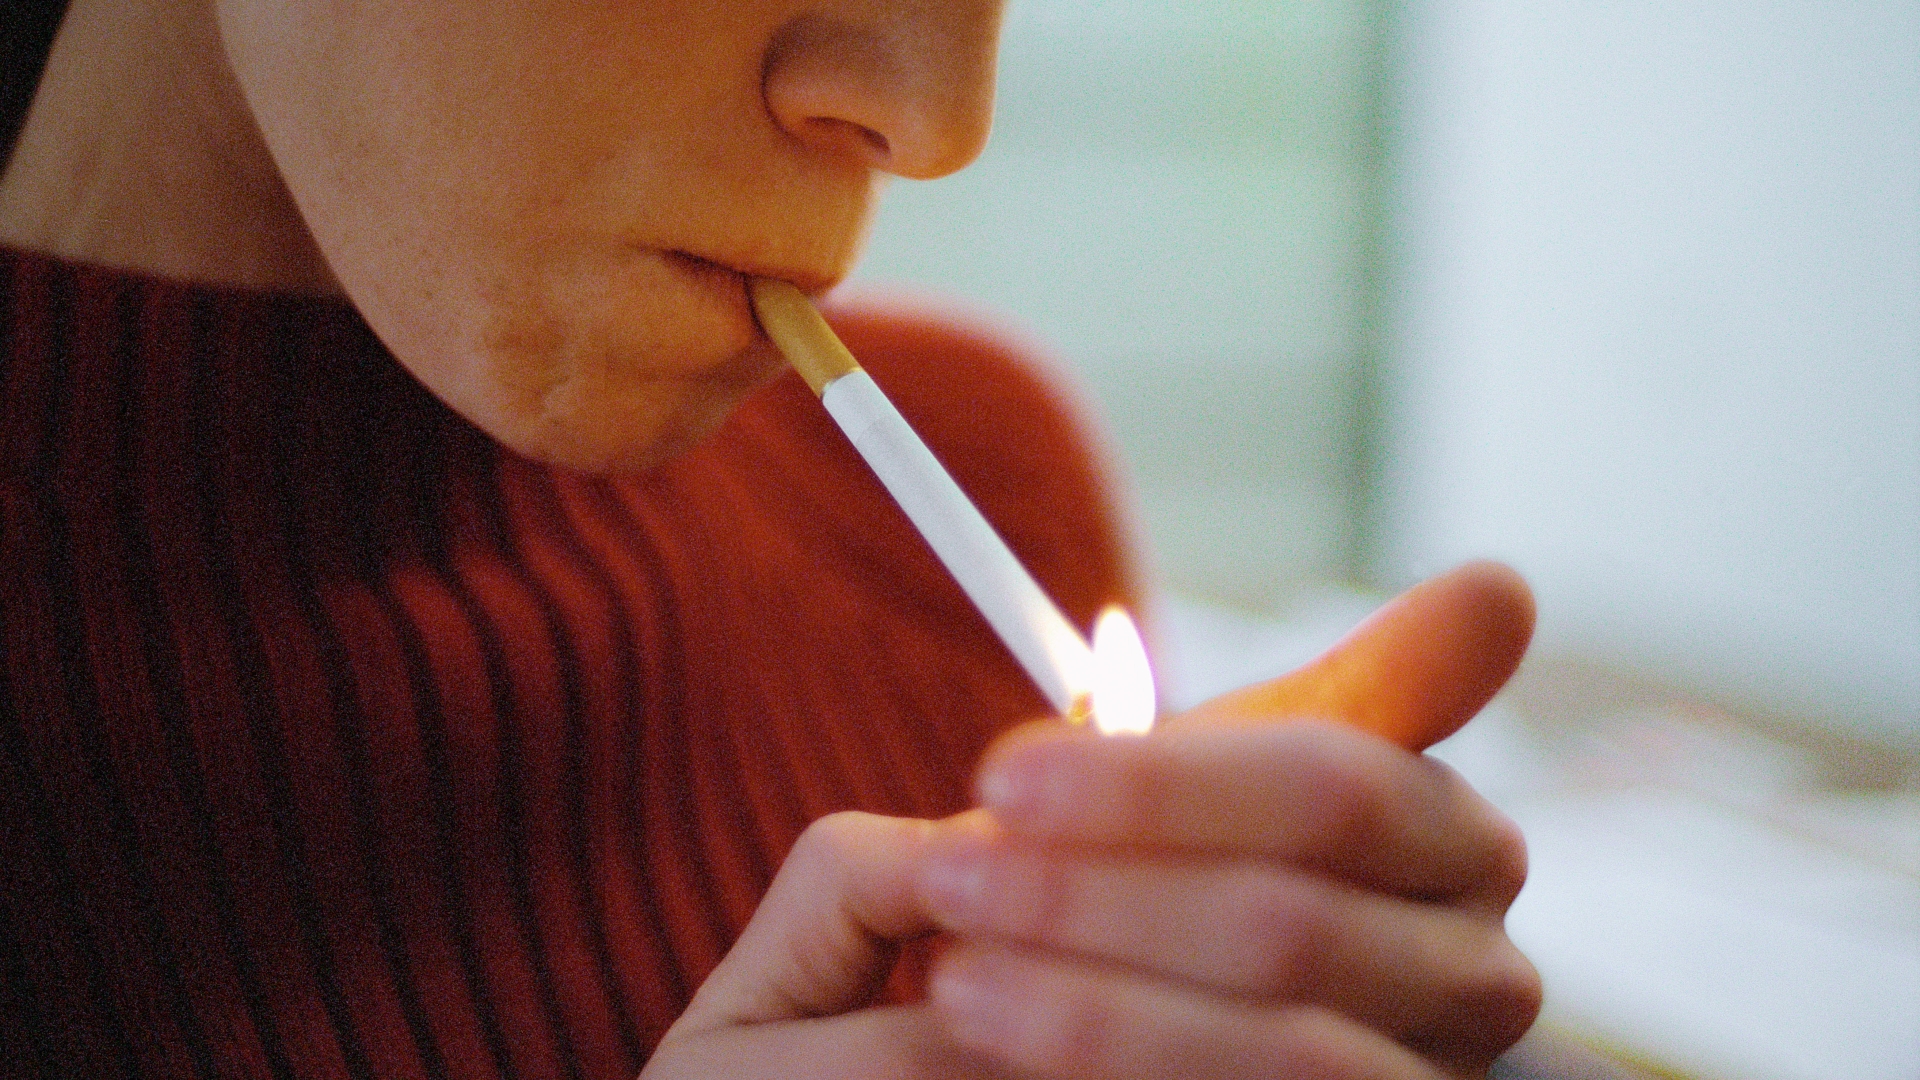 Zapping brain with electrical charge can help smokers quit long term, says study